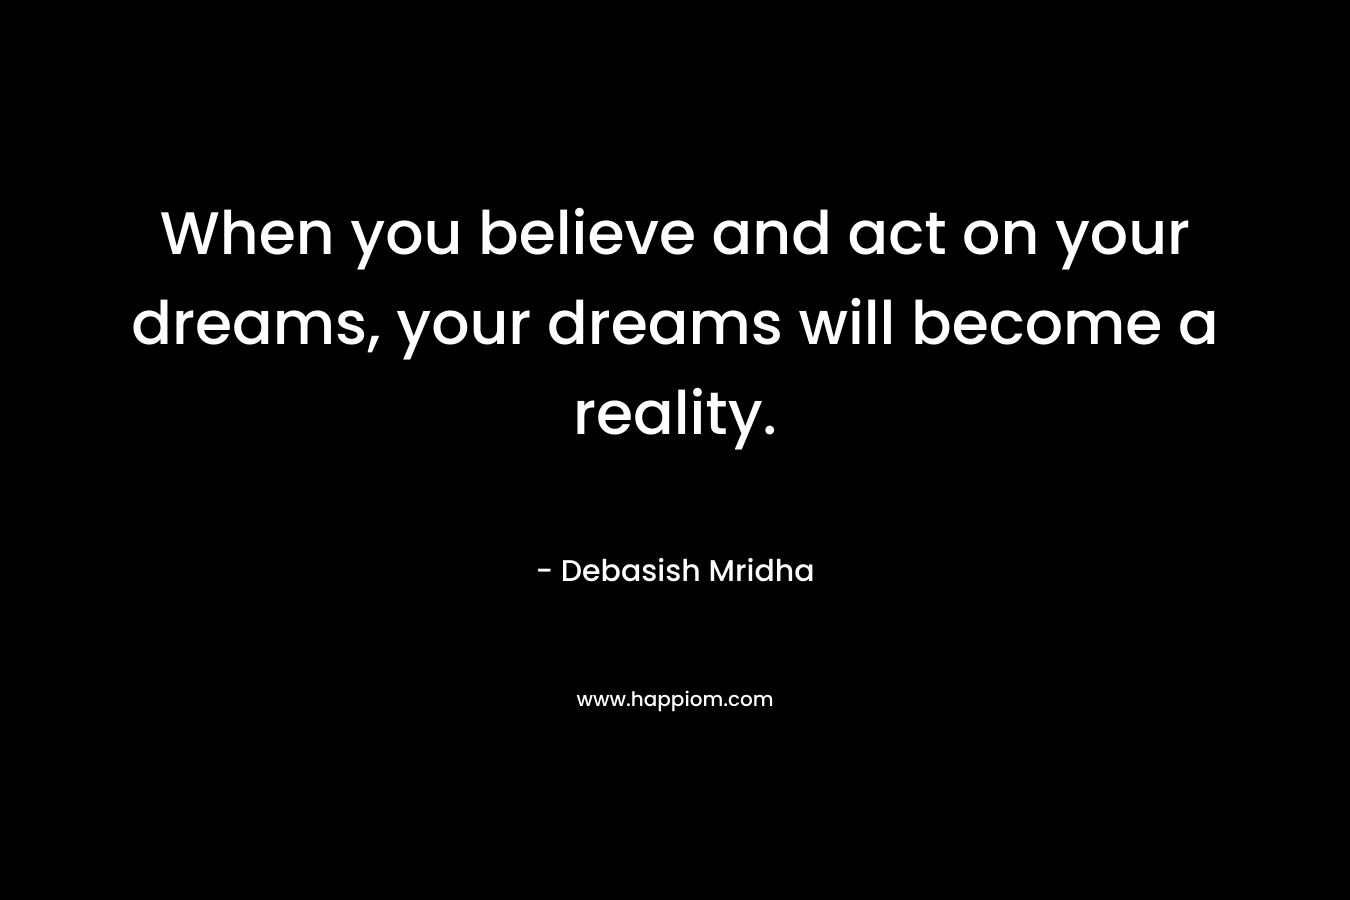 When you believe and act on your dreams, your dreams will become a reality.